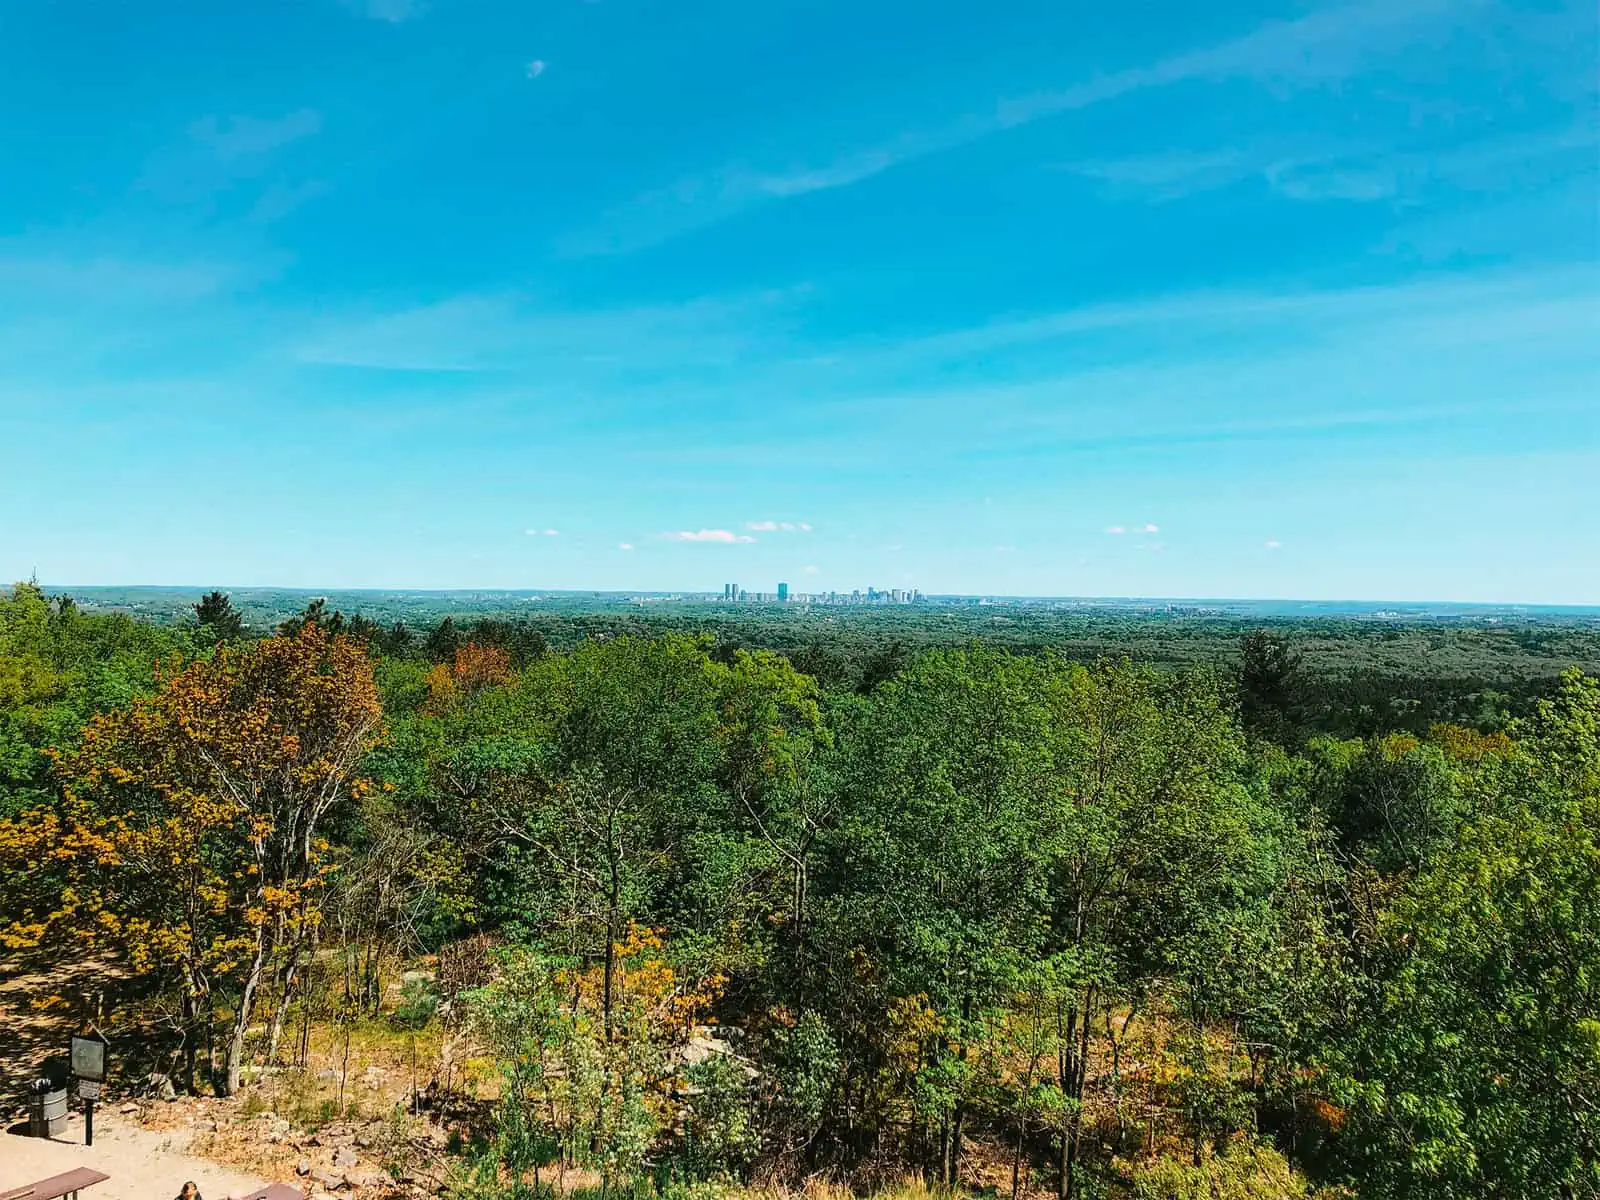 ID: A landscape image. In the foreground are lush and dense green toned trees which hold half of the image. In the mid of the picture you can just make out a city skyline. Above is clear blue sky.